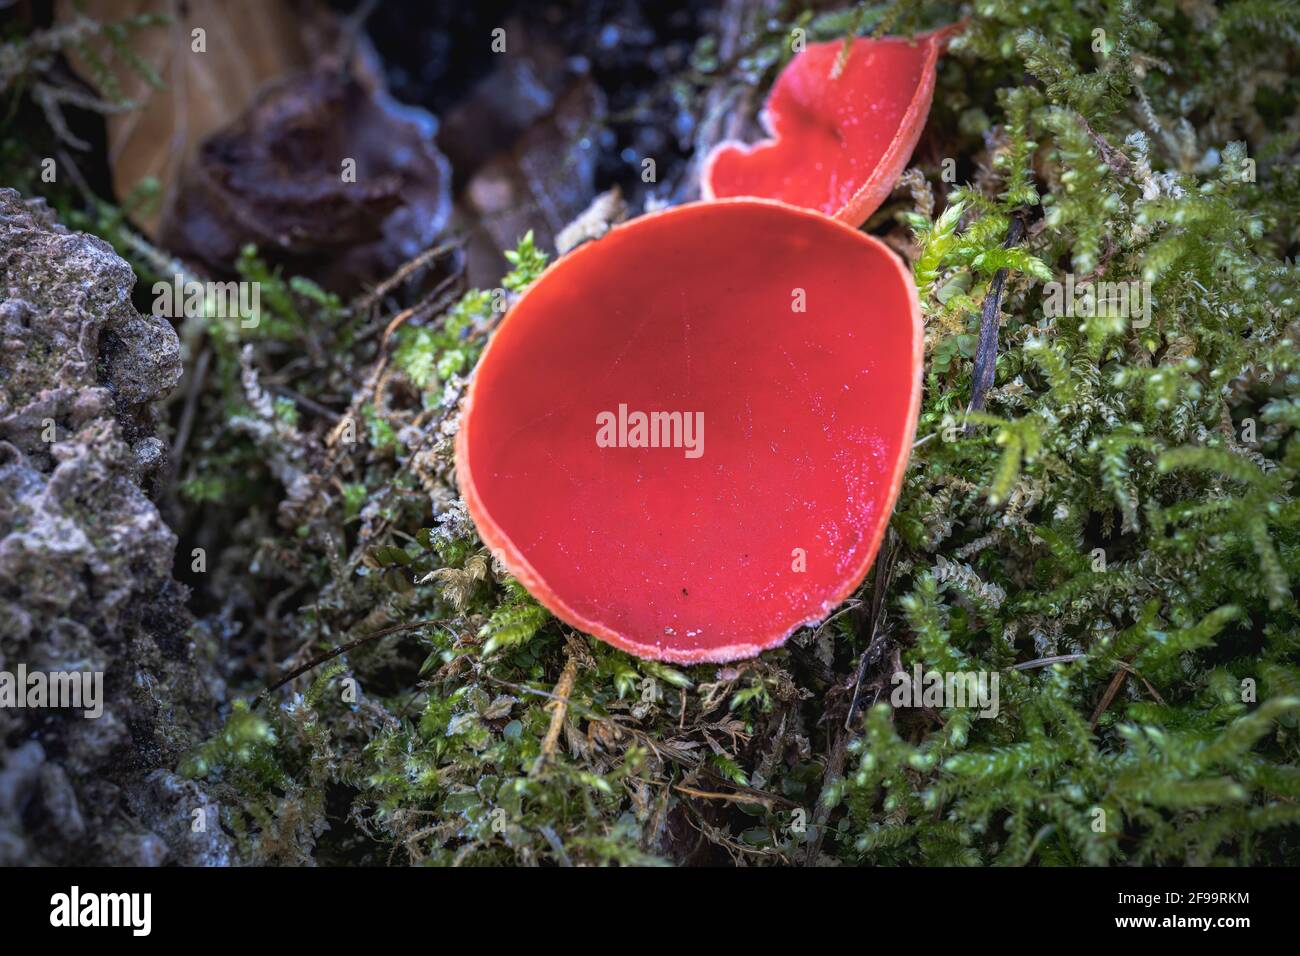 Gobelet écarlate, sarcoscypha coccinea, champignon, forêt, nature, Swabian Alb, Bade-Wurtemberg, Allemagne, Europe Banque D'Images